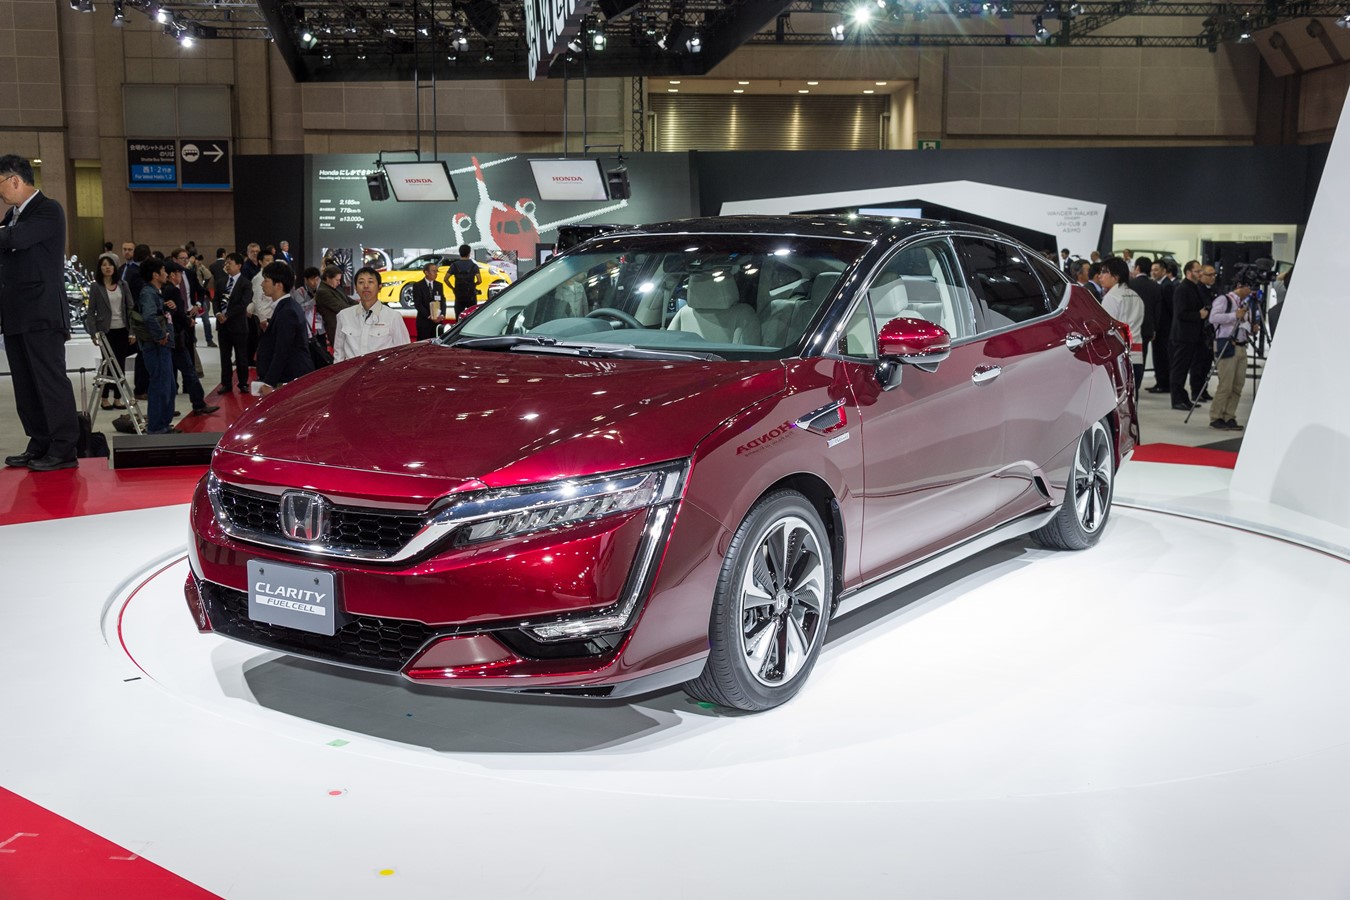 HONDA UNVEILS CLARITY FUEL CELL AT THE 2015 TOKYO MOTOR SHOW